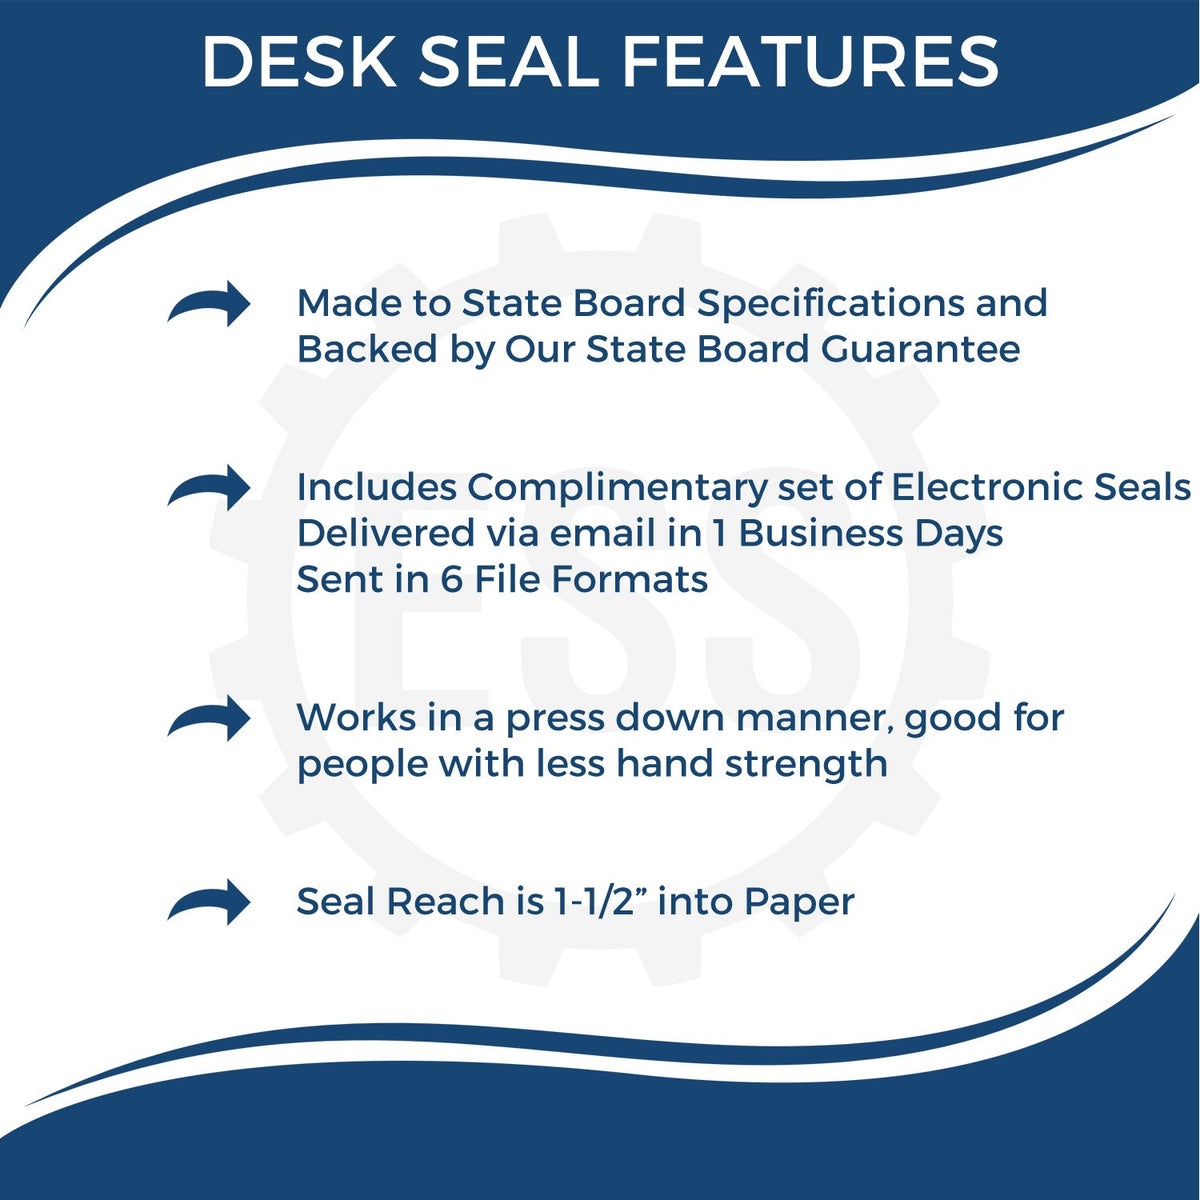 A picture of an infographic highlighting the selling points for the Iowa Desk Architect Embossing Seal